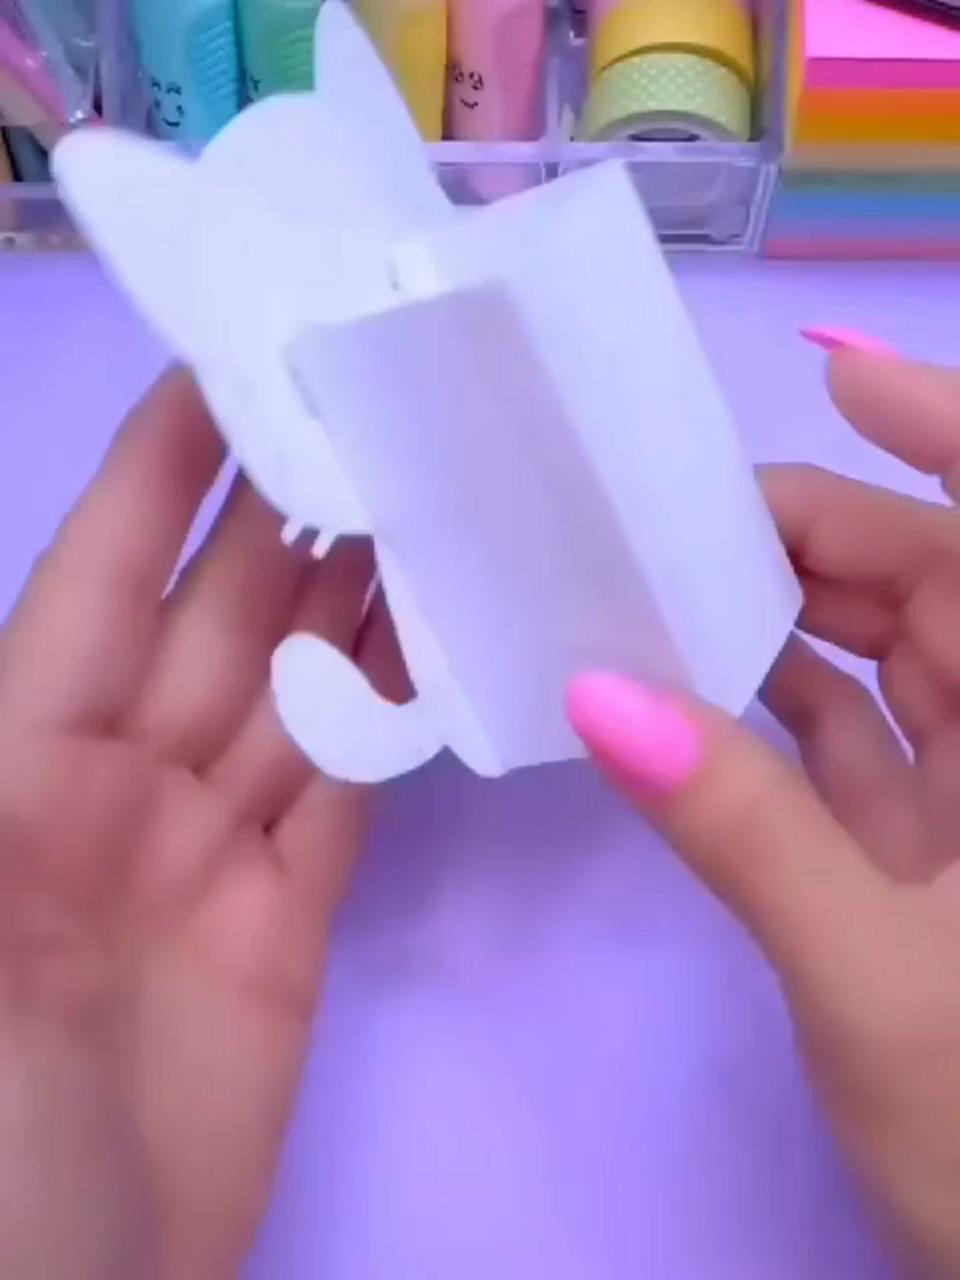 Easy paper crafts diy; paper craft diy projects